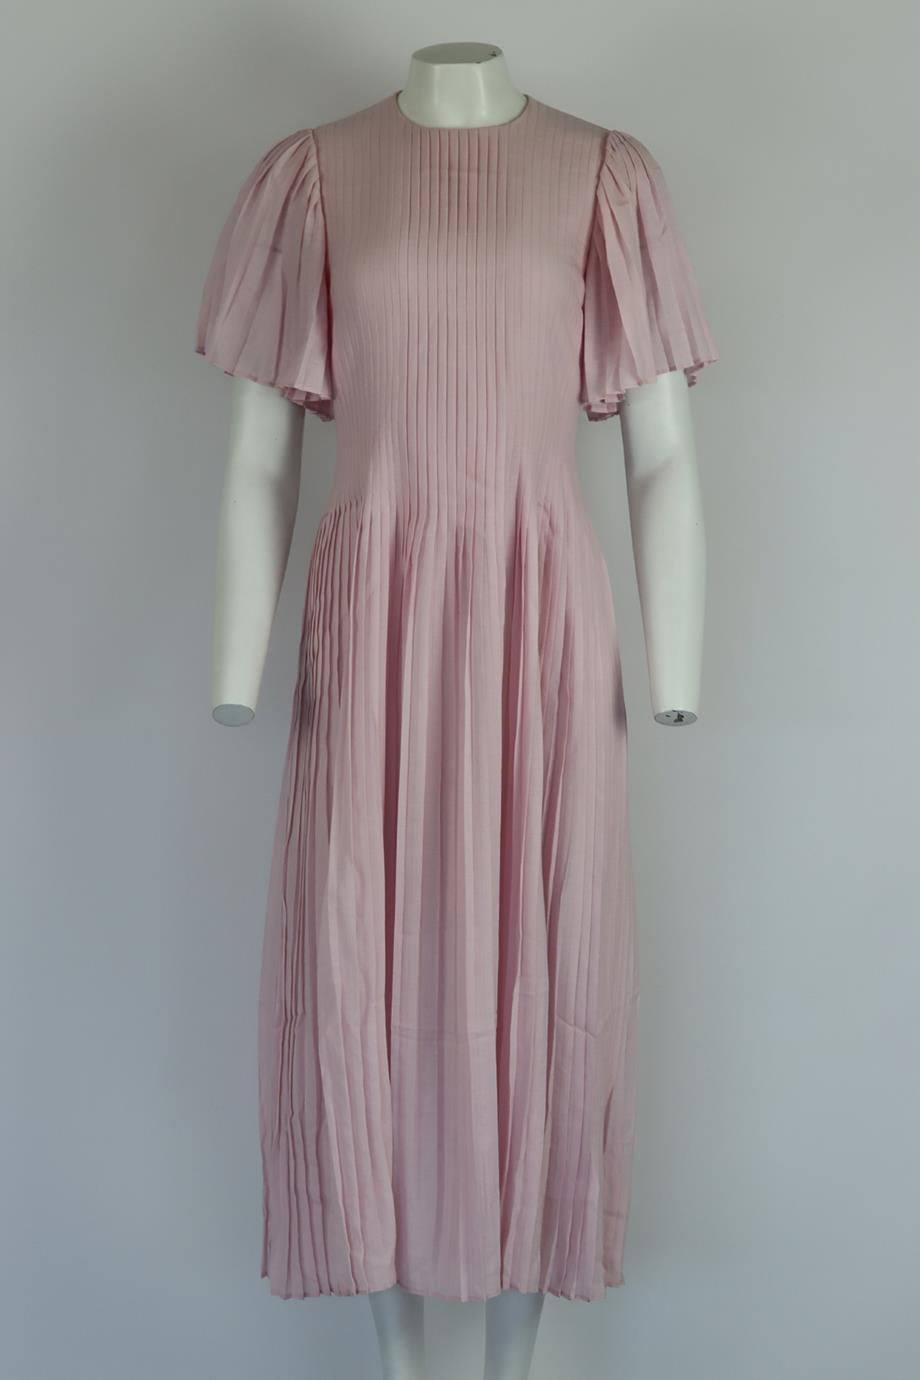 Gabriela Hearst pleated cashmere and wool blend midi dress. Pink. Short sleeve, crewneck. Zip fastening at back. 65% Virgin wool, 35% cashmere; lining: 100% Silk. Size: IT 40 (UK 8, US 4, FR 36). Bust: 33 in. Waist: 27.8 in. Hips: 68 in. Length: 51